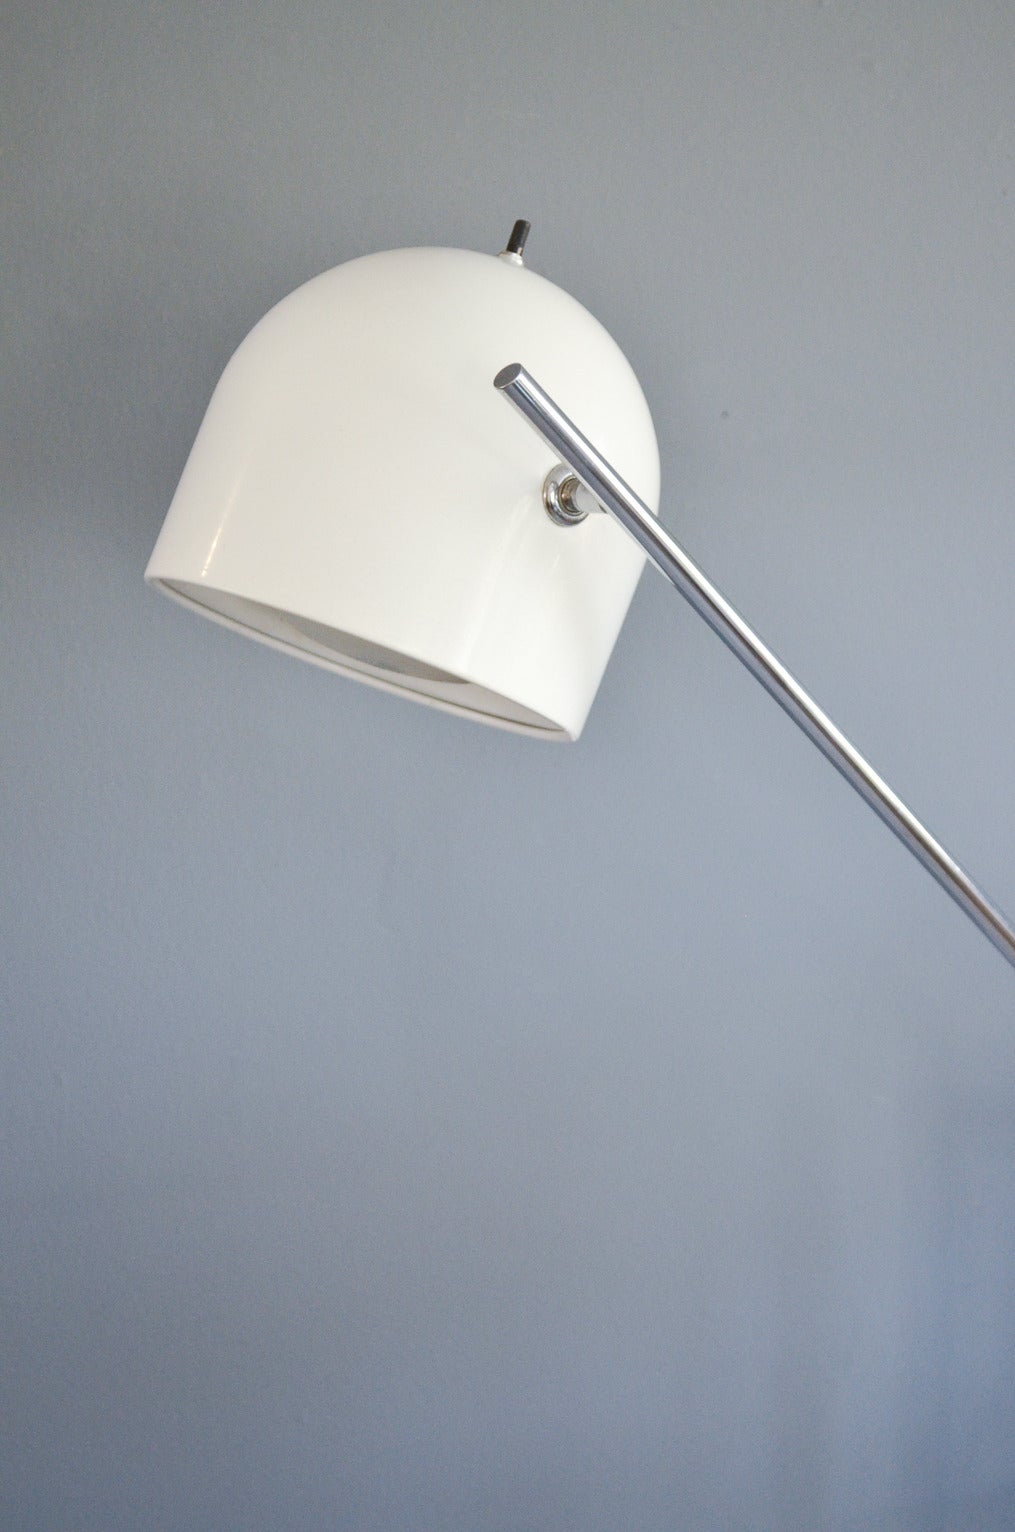 Chrome and white enamel Italian articulating two-arm floor lamp in excellent vintage condition. Arms articulate and move in almost any direction and the floating shades are on a ball and socket fixture that allows them to turn 360 degrees in any